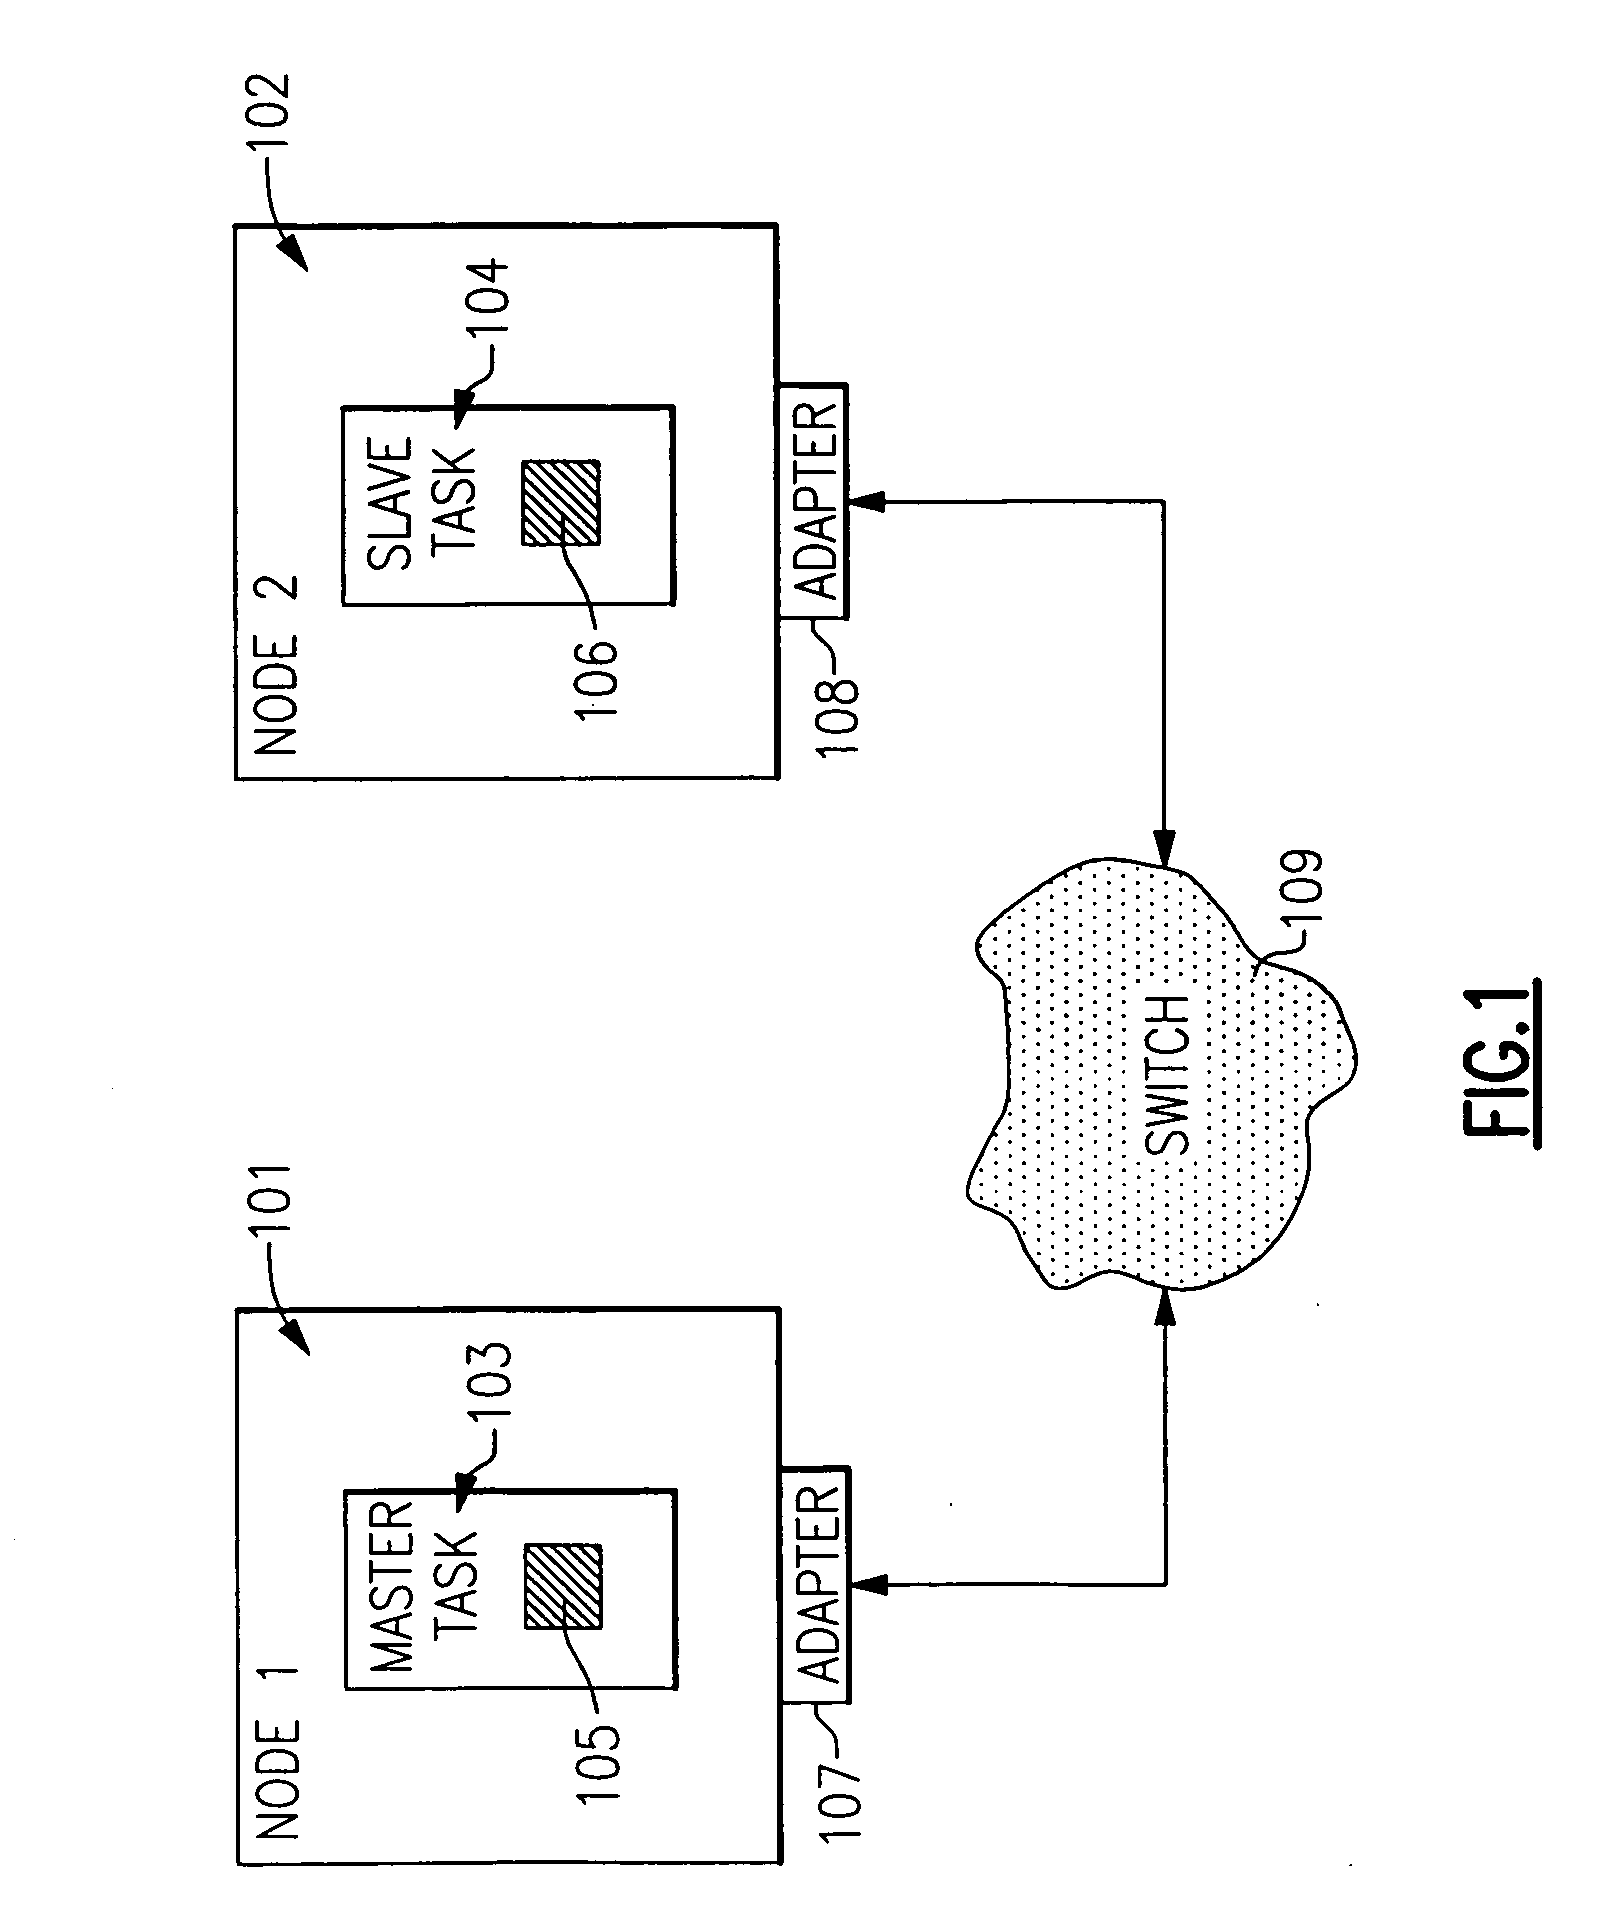 Remote direct memory access with striping over an unreliable datagram transport